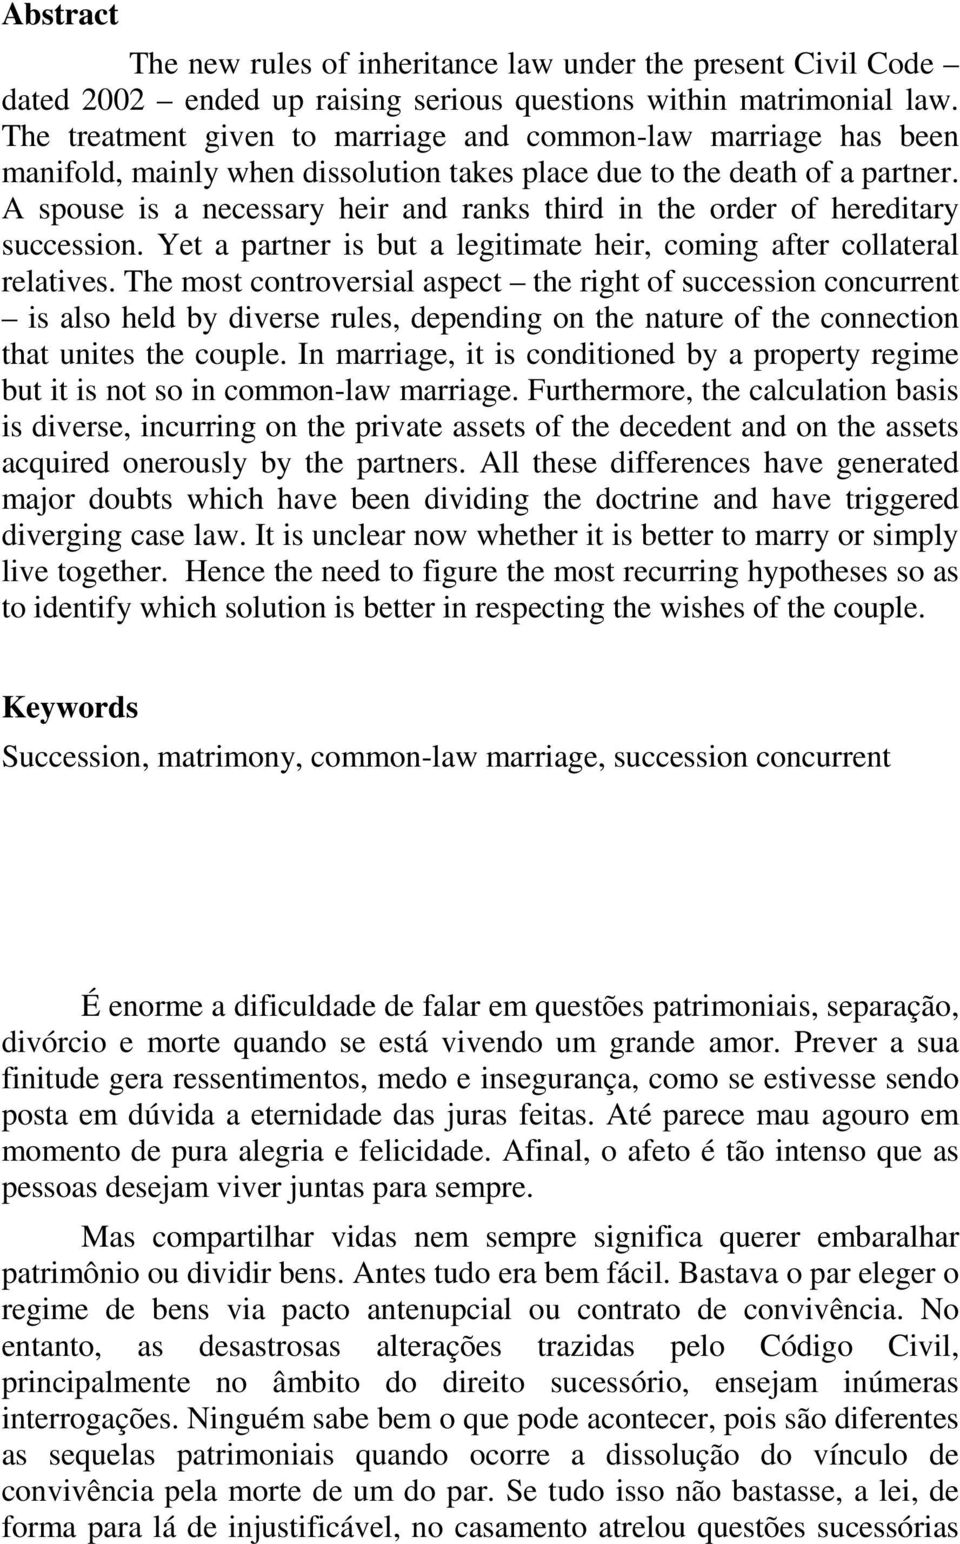 A spouse is a necessary heir and ranks third in the order of hereditary succession. Yet a partner is but a legitimate heir, coming after collateral relatives.